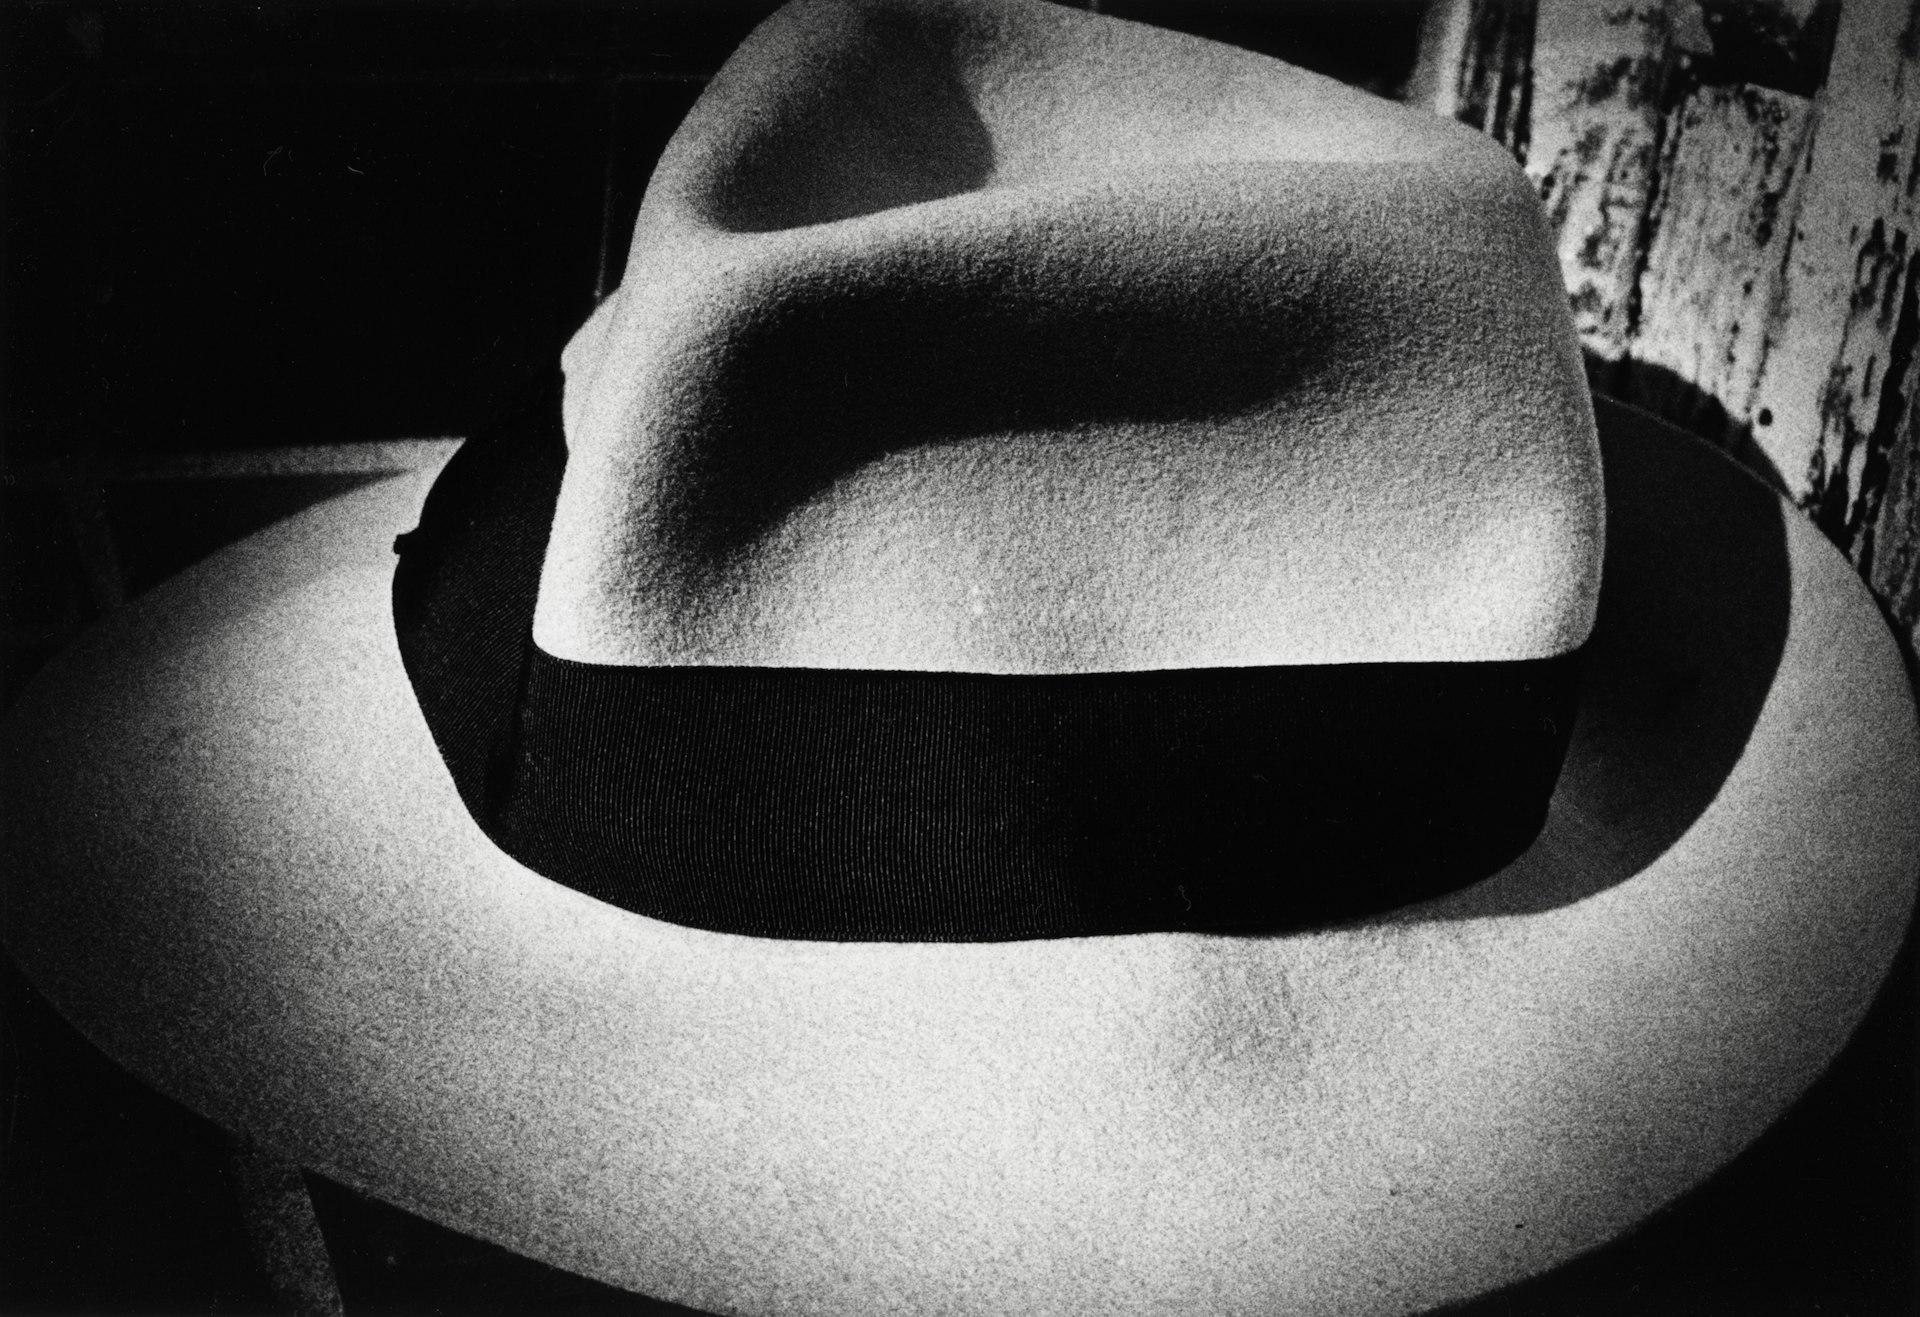 “Light and Shadow 4: Hat”, 1982, 1982